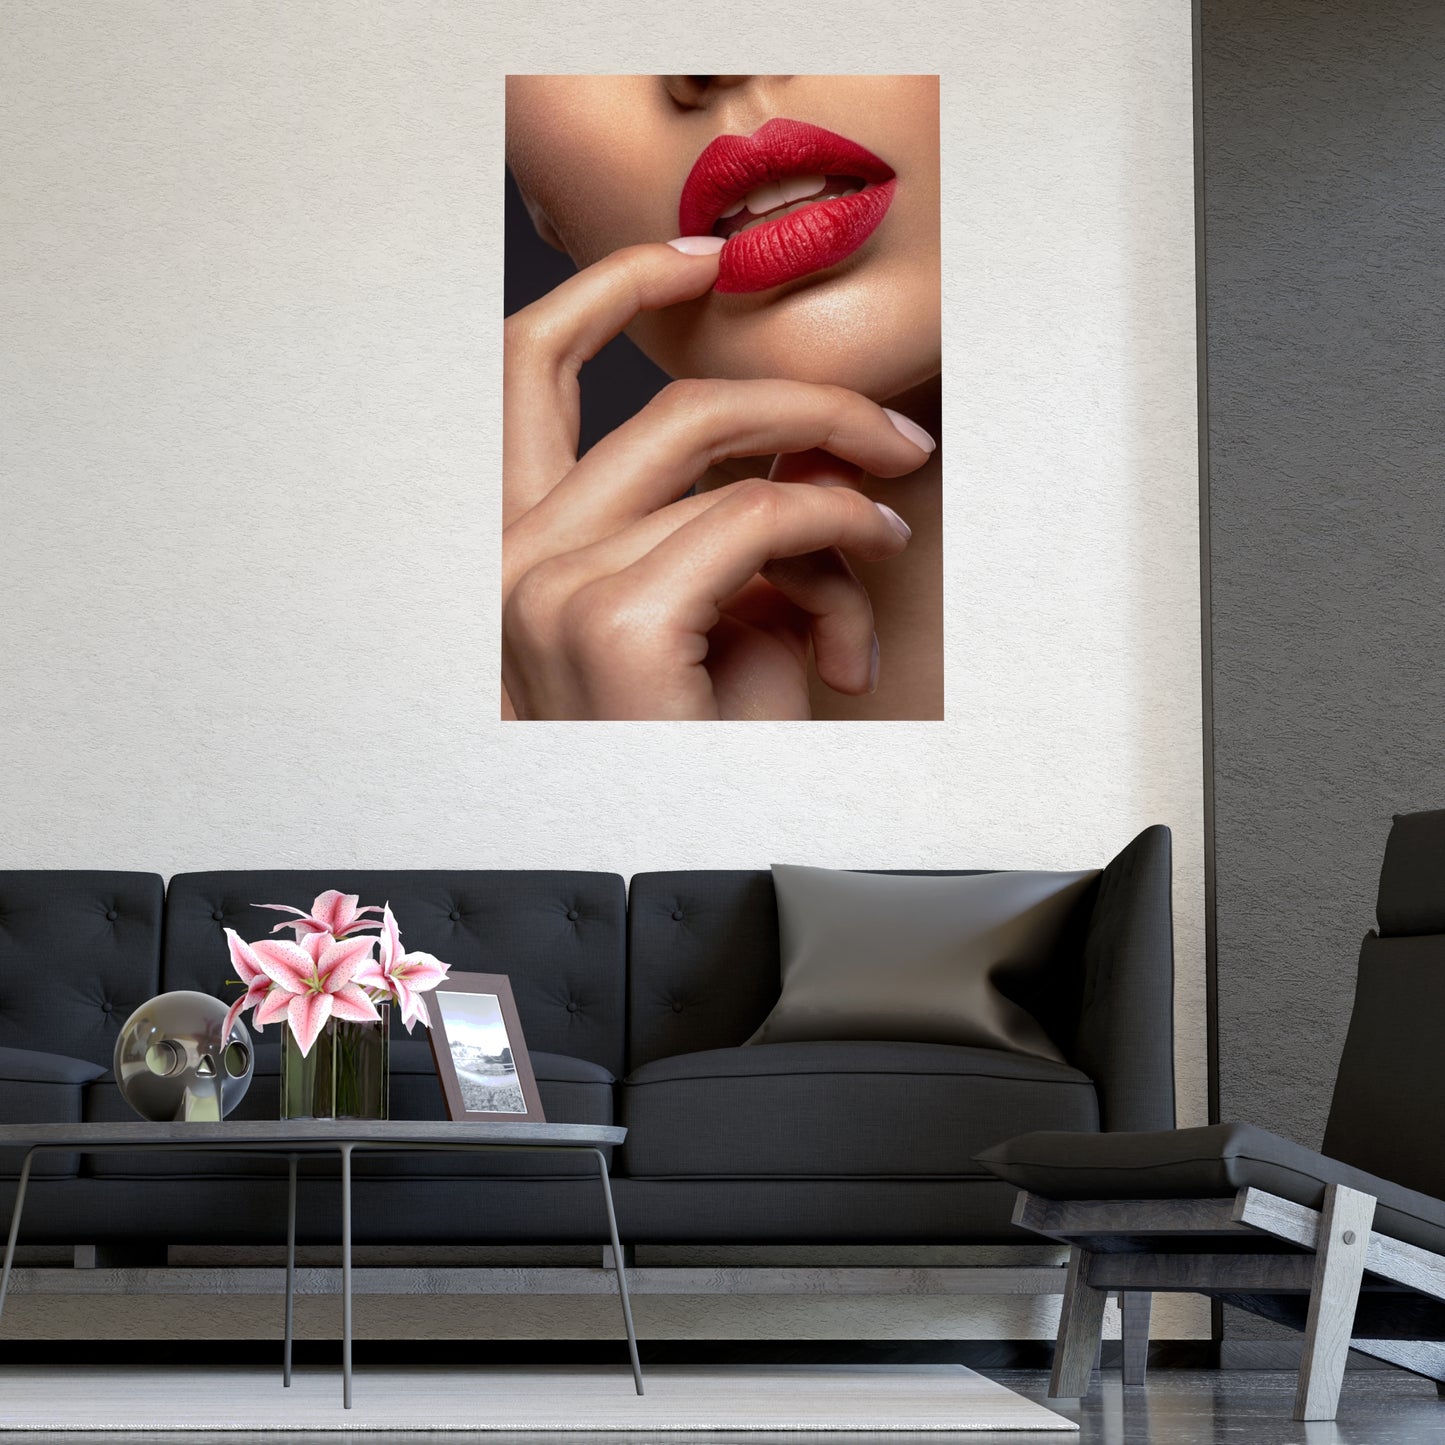 Posters - Sexy Lips - Vertical Matte Posters - 07